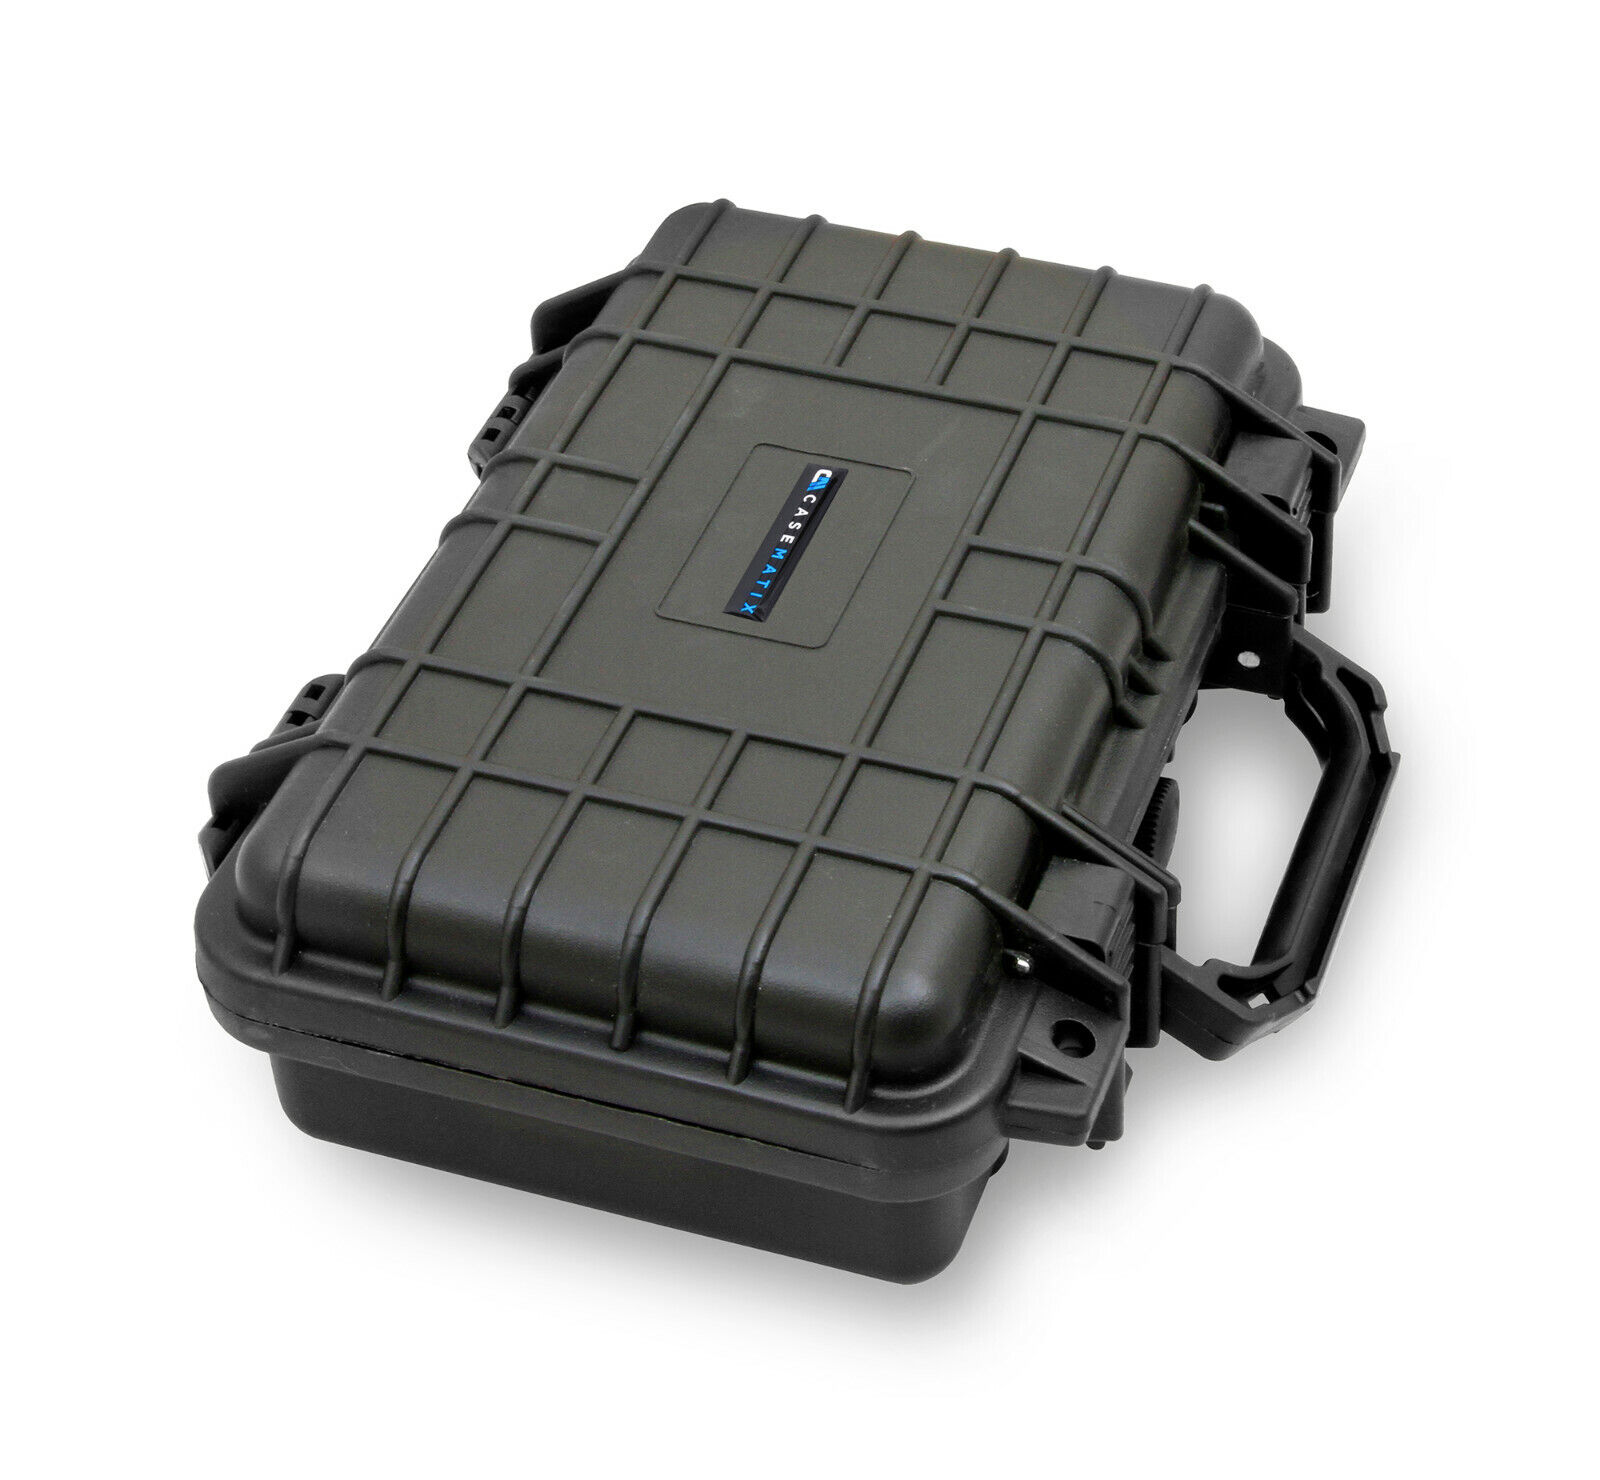 CASEMATIX Hard Shell TourBox Controller Case in Waterproof Exterior, Case Only